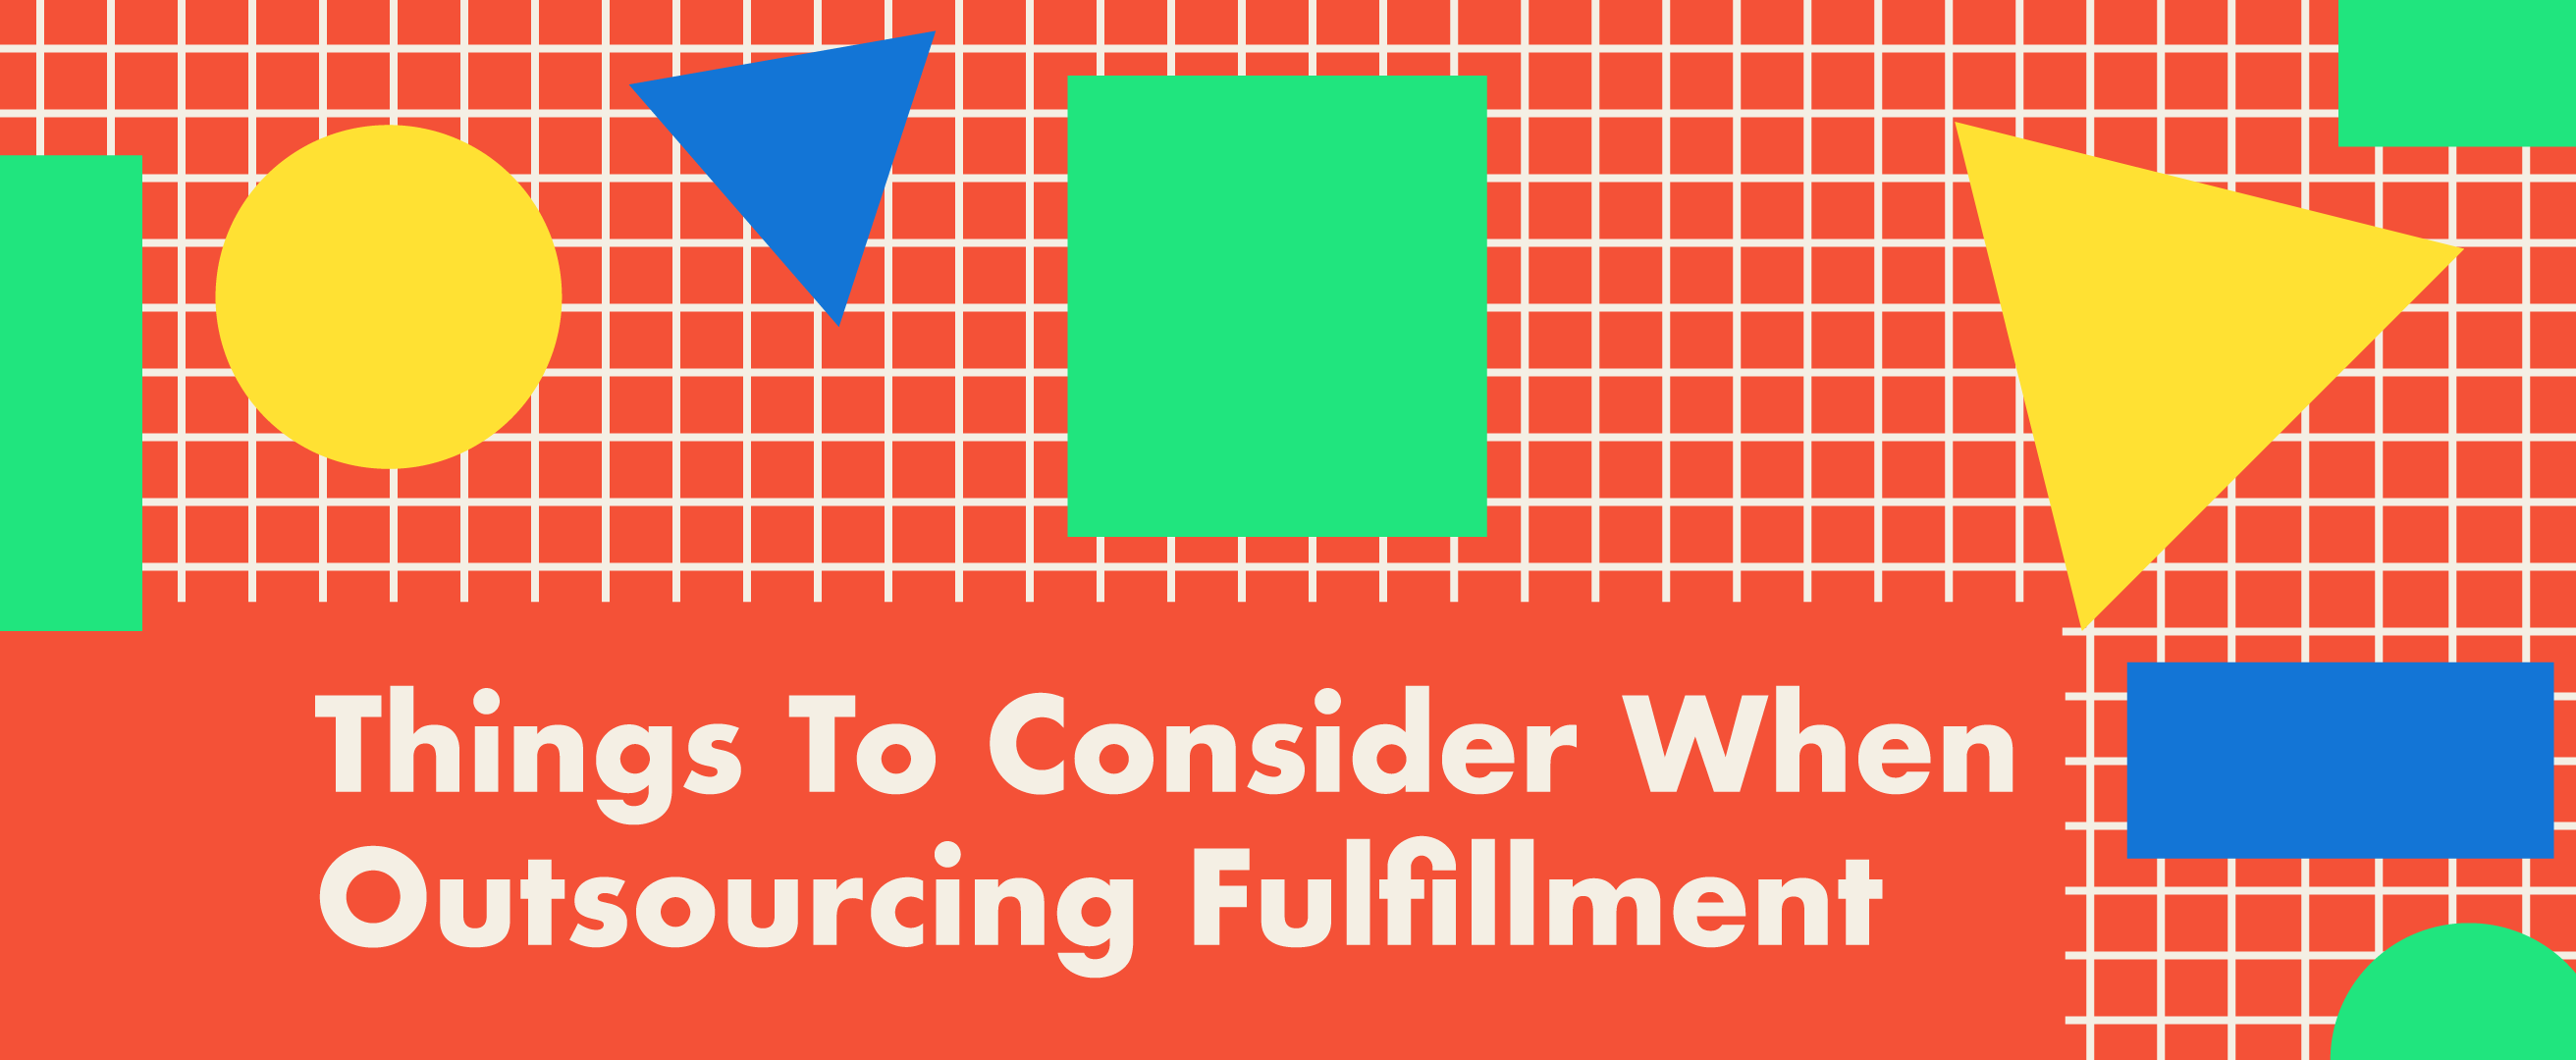 Things to Consider When Outsourcing Fulfillment